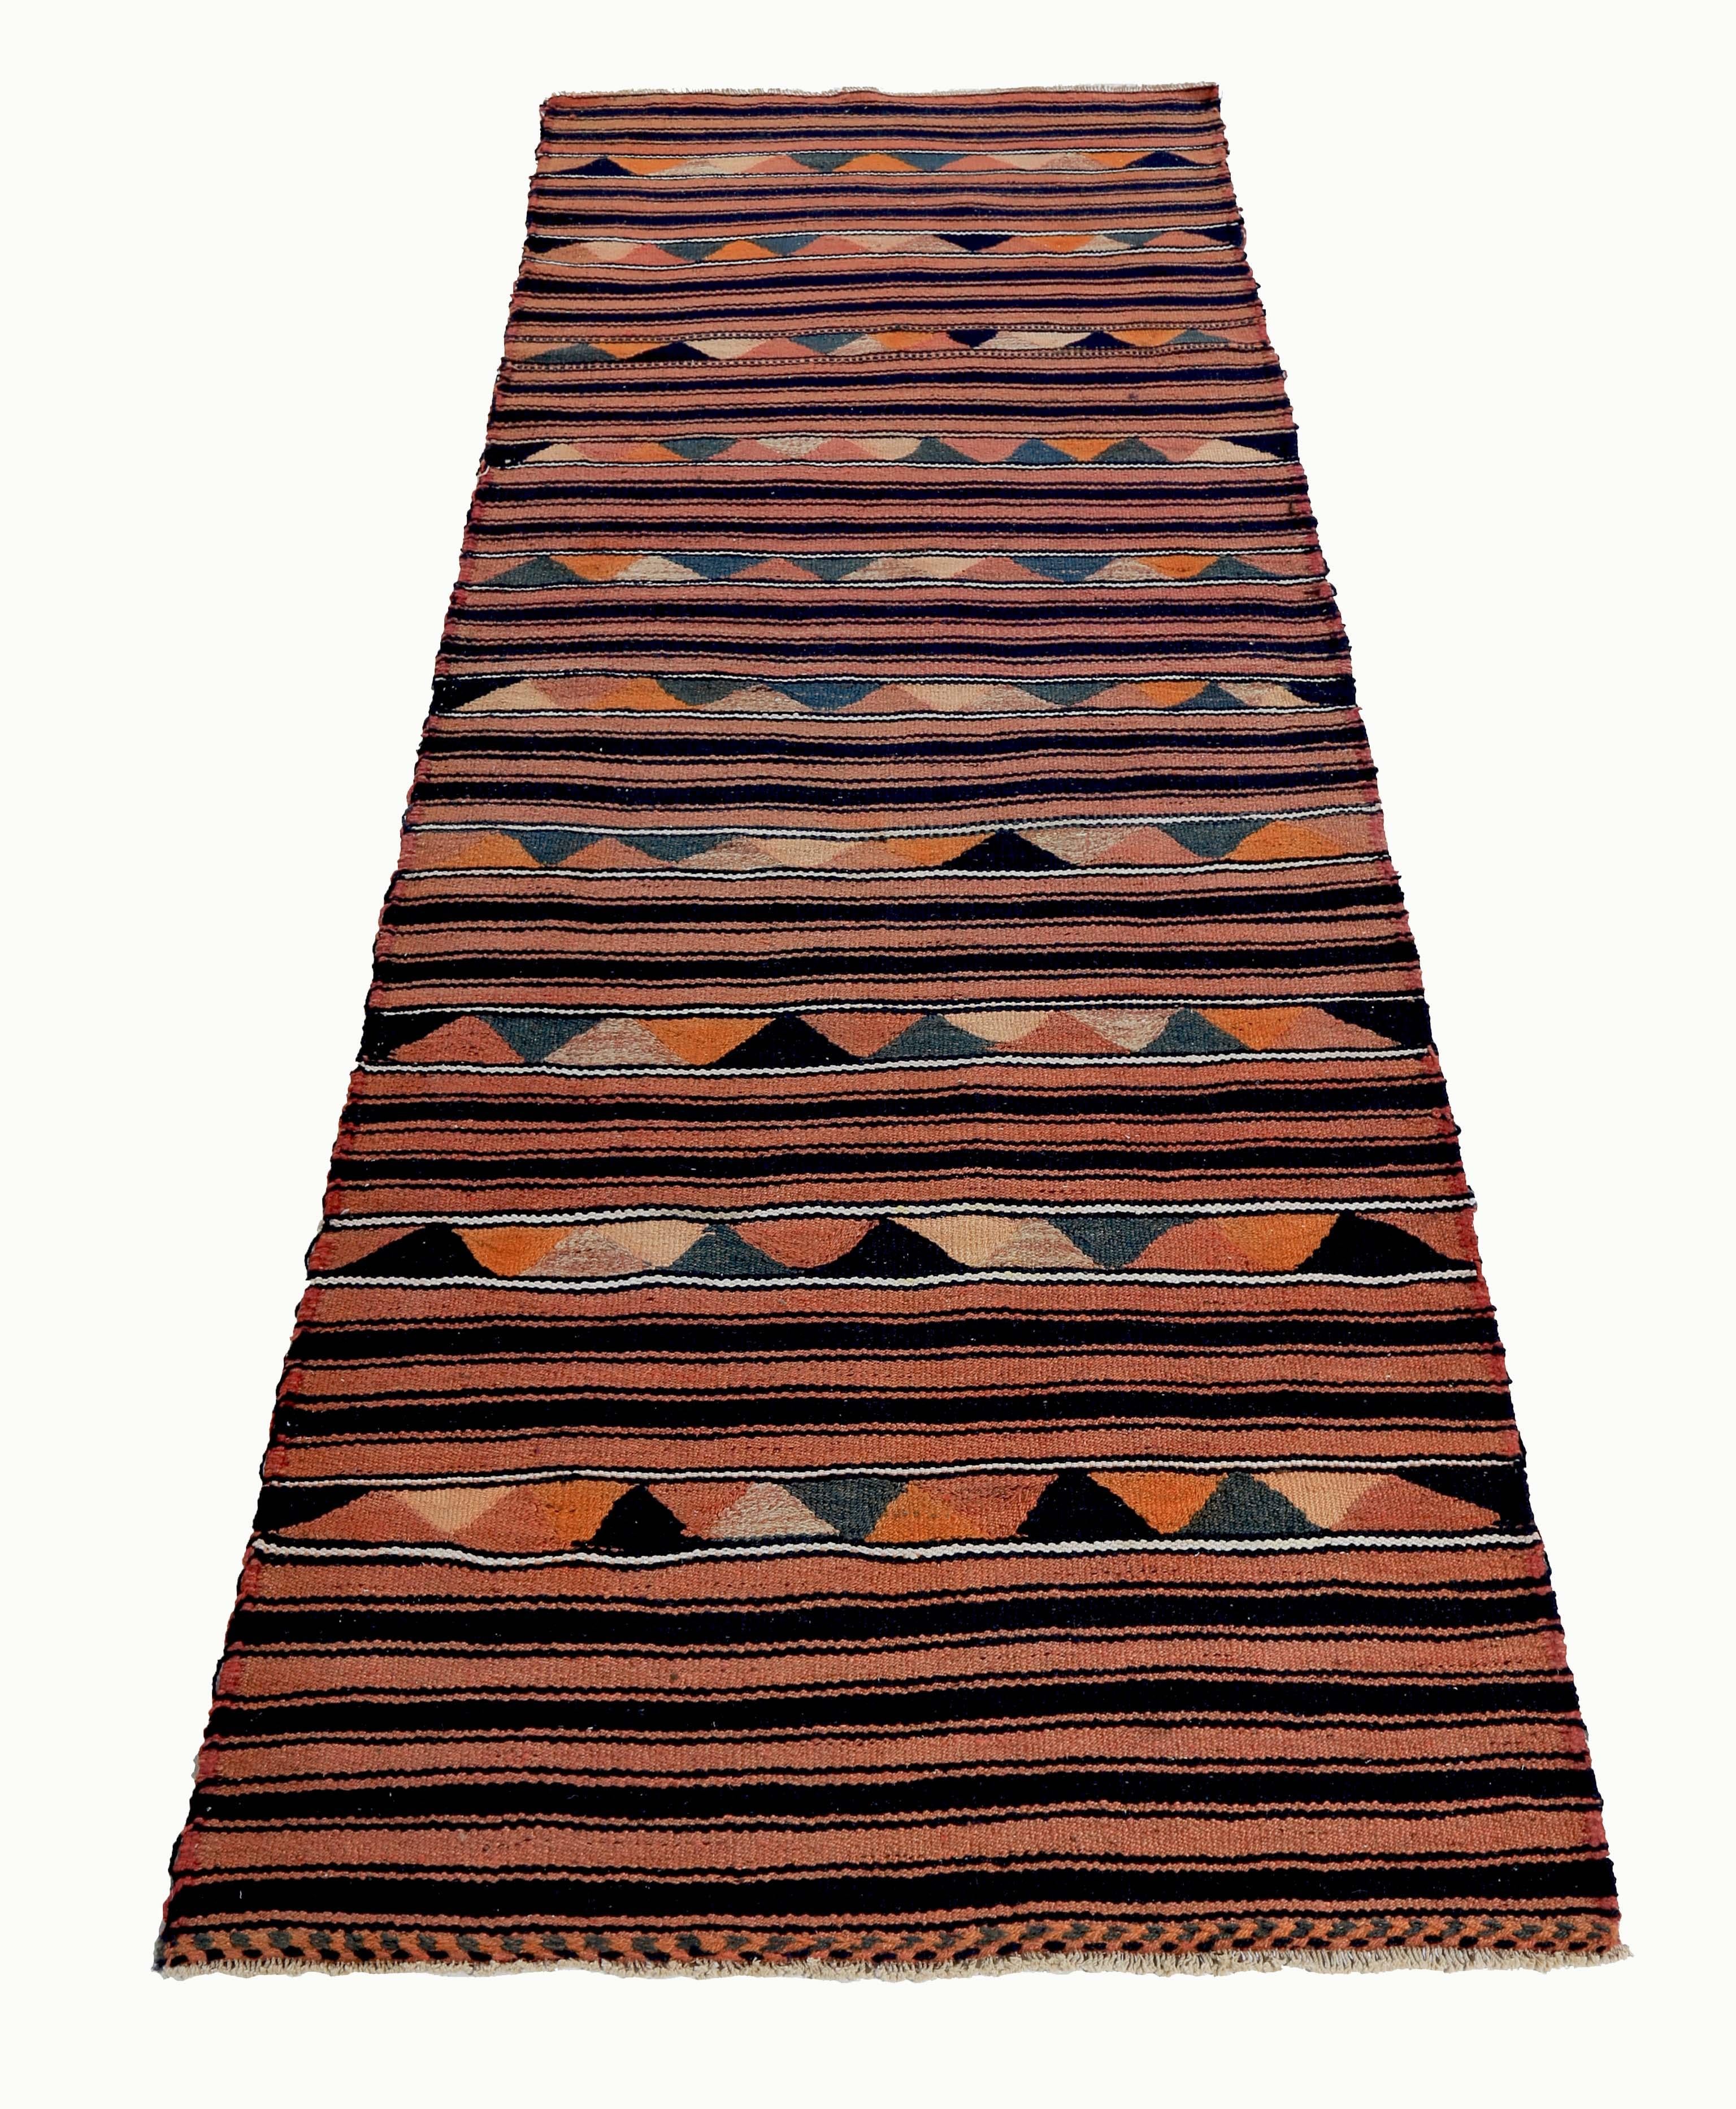 Turkish runner rug handwoven from the finest sheep’s wool and colored with all-natural vegetable dyes that are safe for humans and pets. It’s a traditional Kilim flat-weave design featuring red, black, and orange tribal details. It’s a stunning